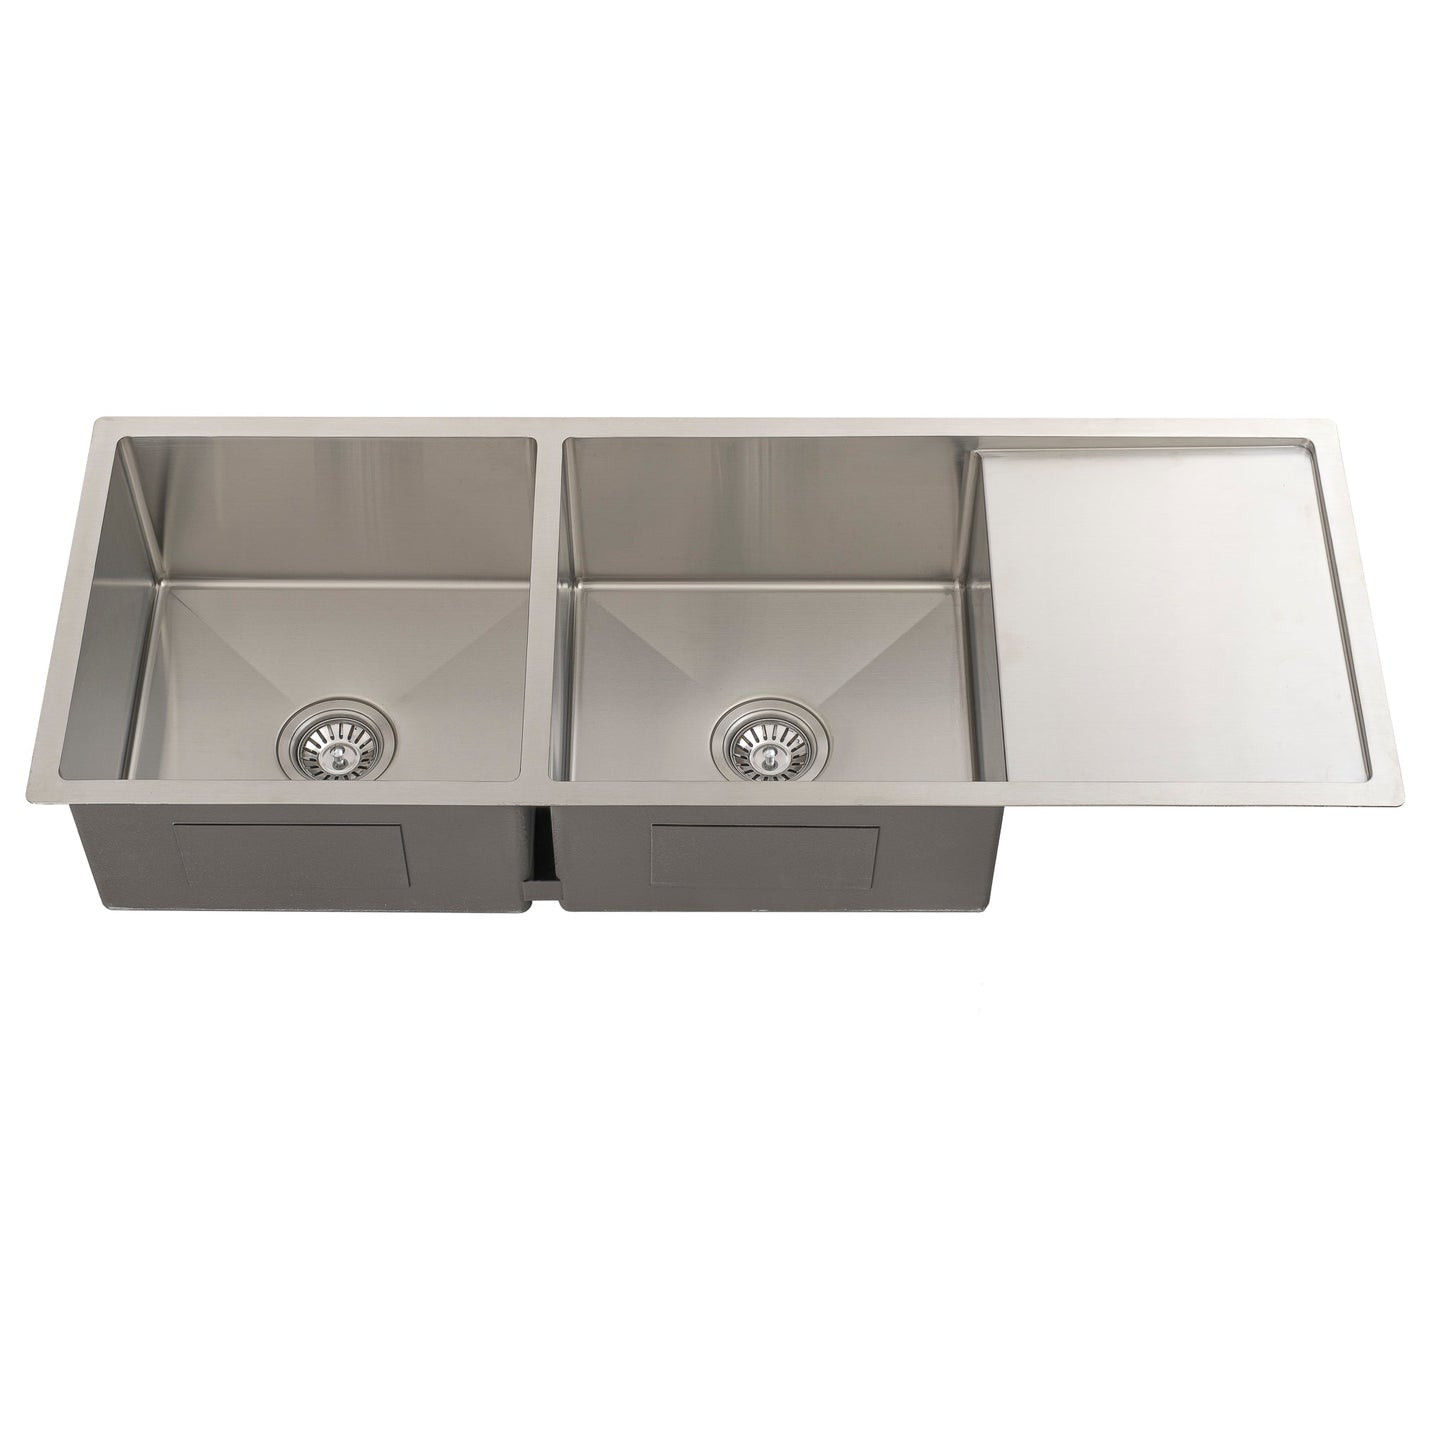 Retto II 1190mm x 450mm x 230mm Stainless Steel Double Sink with Drainer, Brushed Nickel Silver